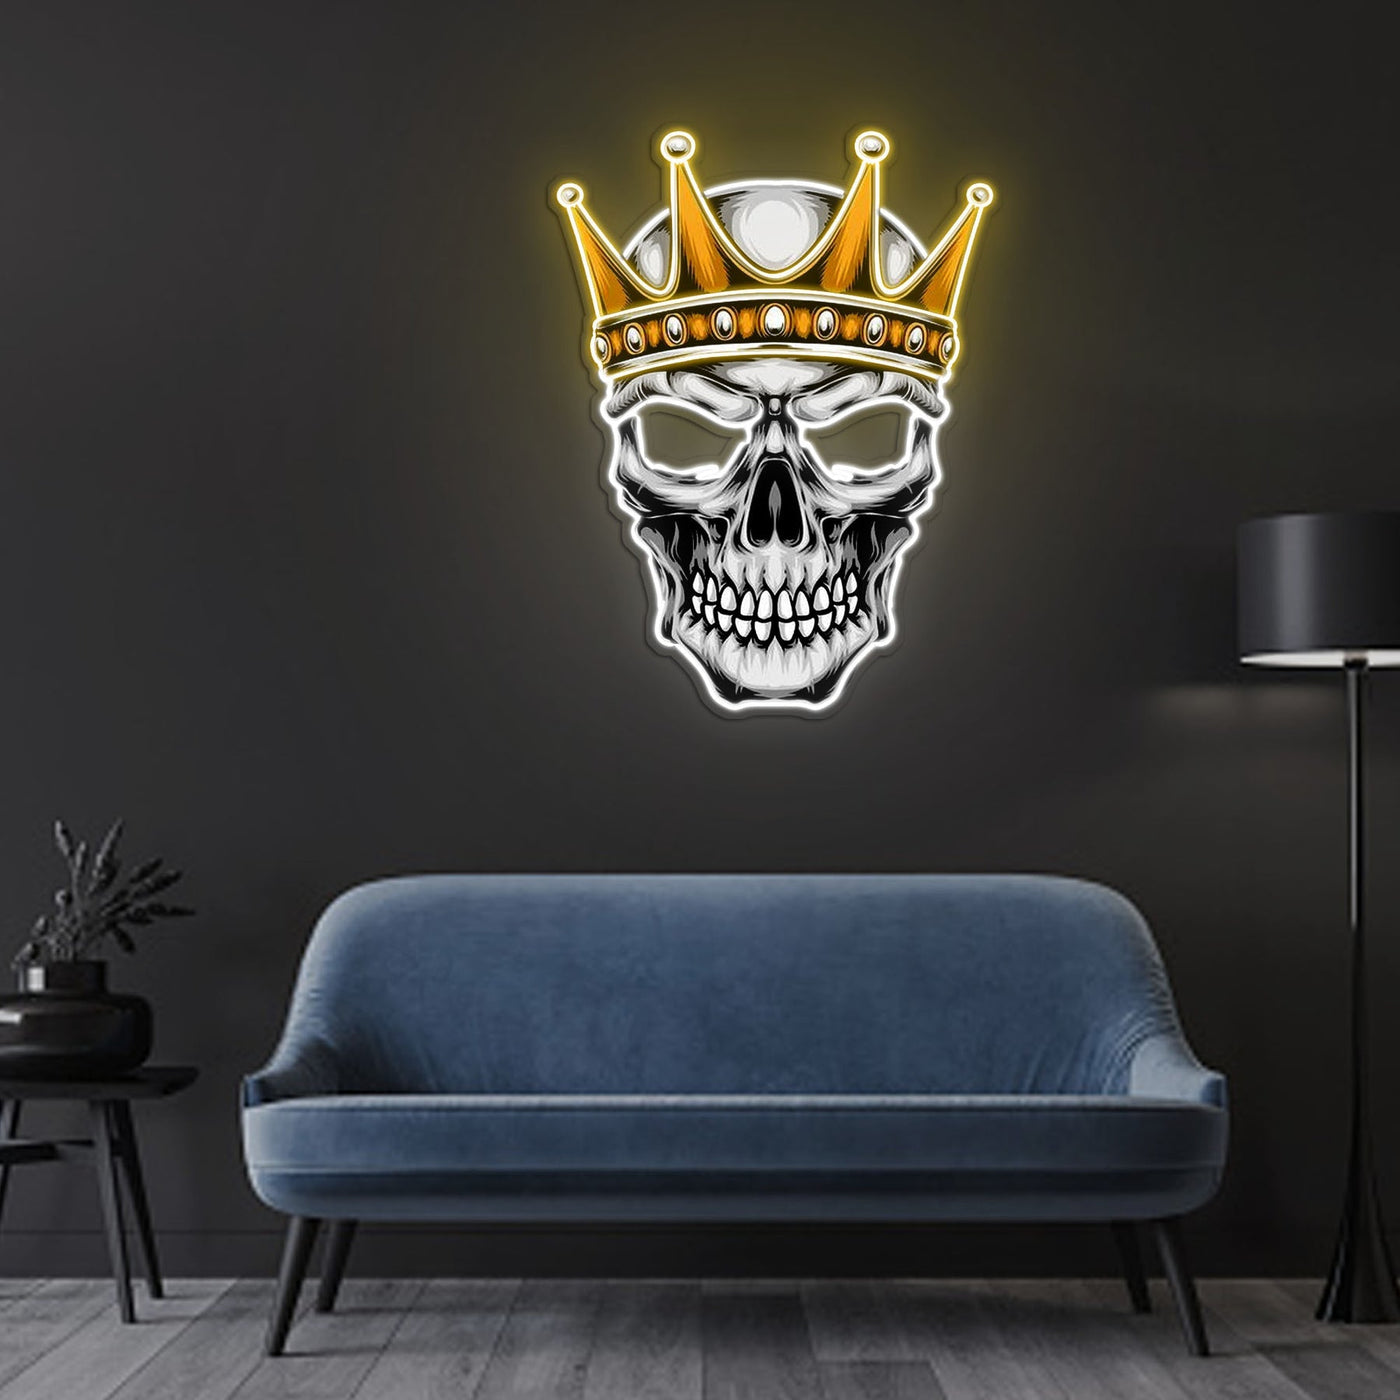 Skull With Crown Neon Sign x Acrylic Artwork - 2ftLED Neon x Acrylic Print